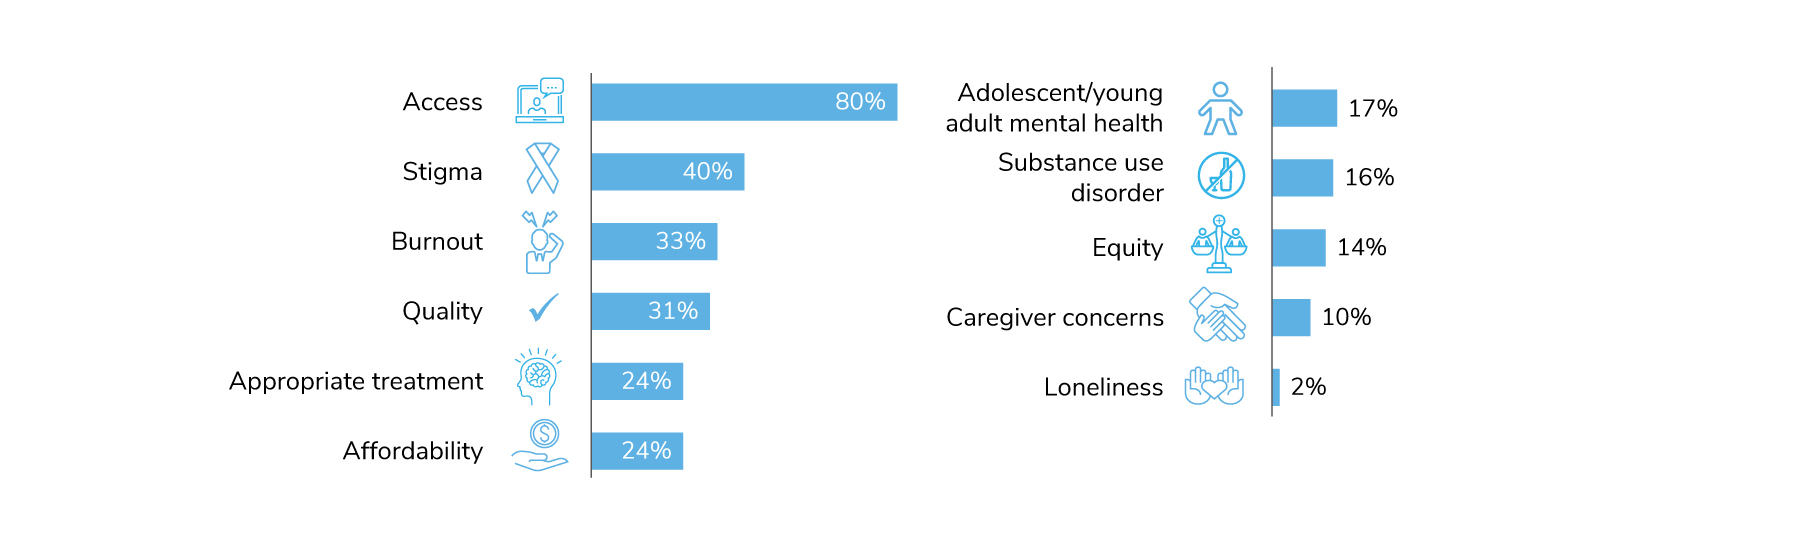 The top mental health focus areas for 2023 are access (80%), stigma (40%), burnout (33%), quality (31%), appropriate treatment (24%) and affordability (24%).